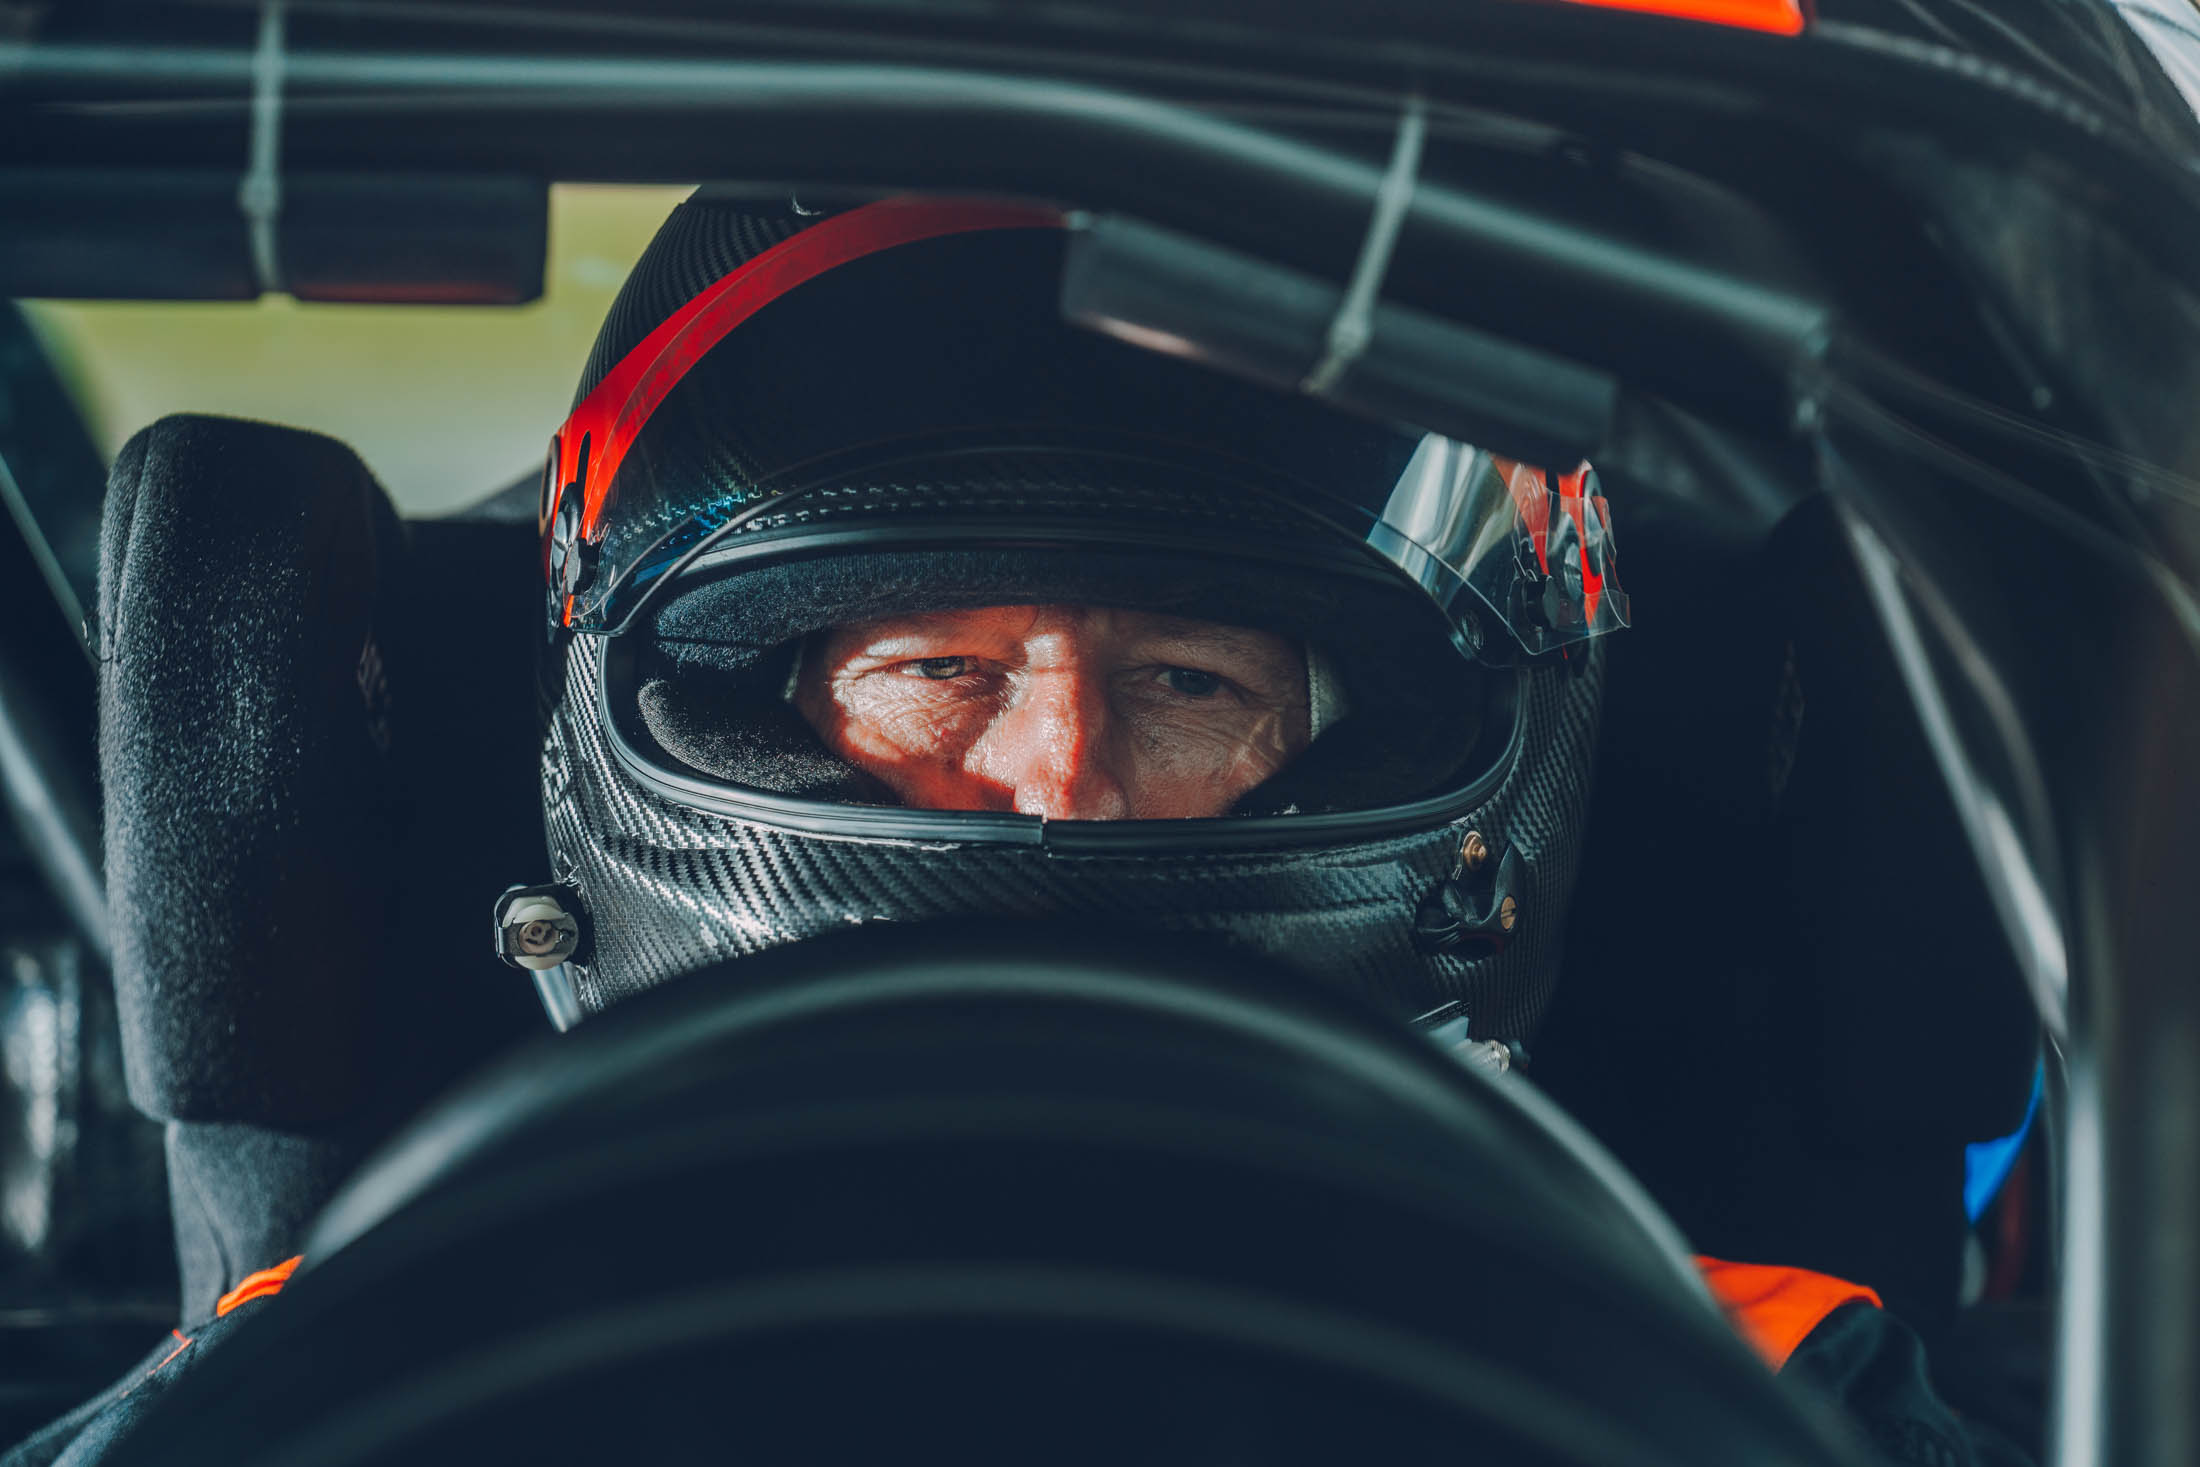 The Man Who Would Break the 305-mph Barrier - Worth